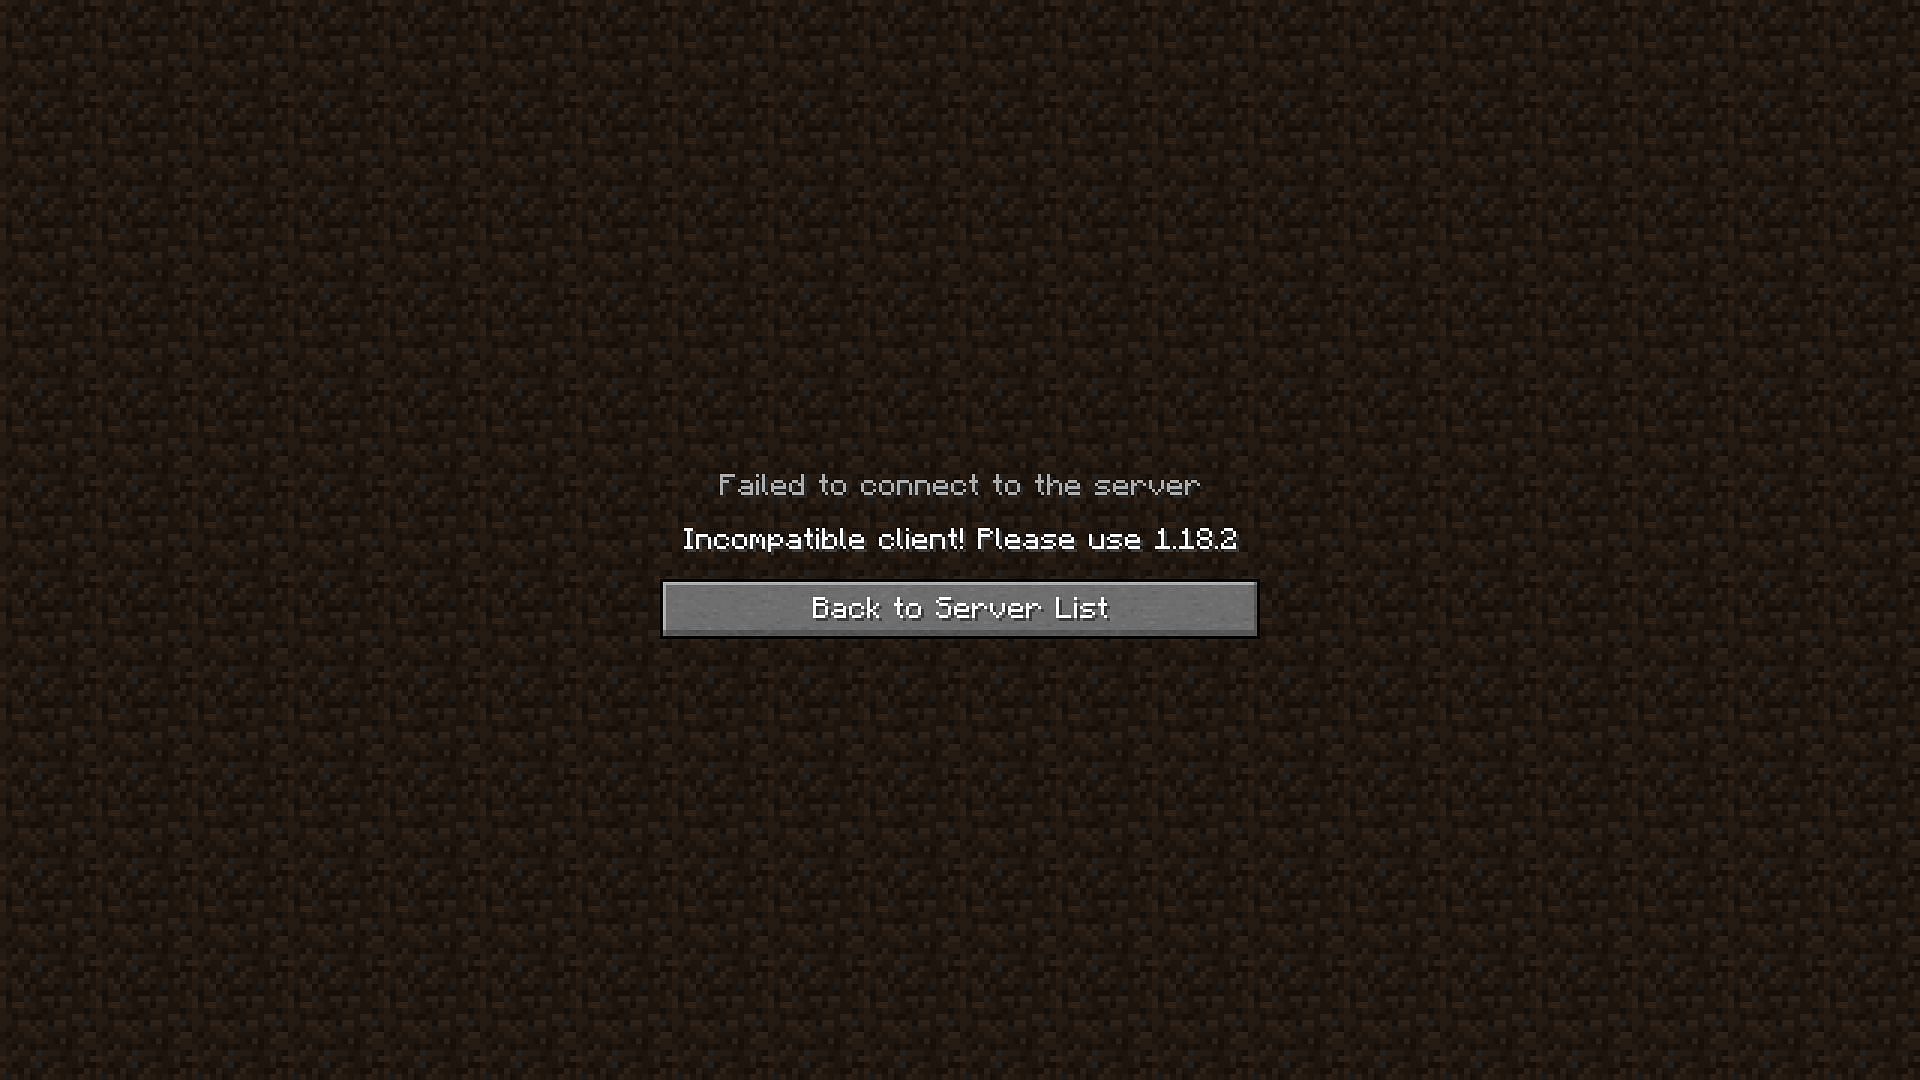 An example of the incompatible client error (Image via Minecraft)